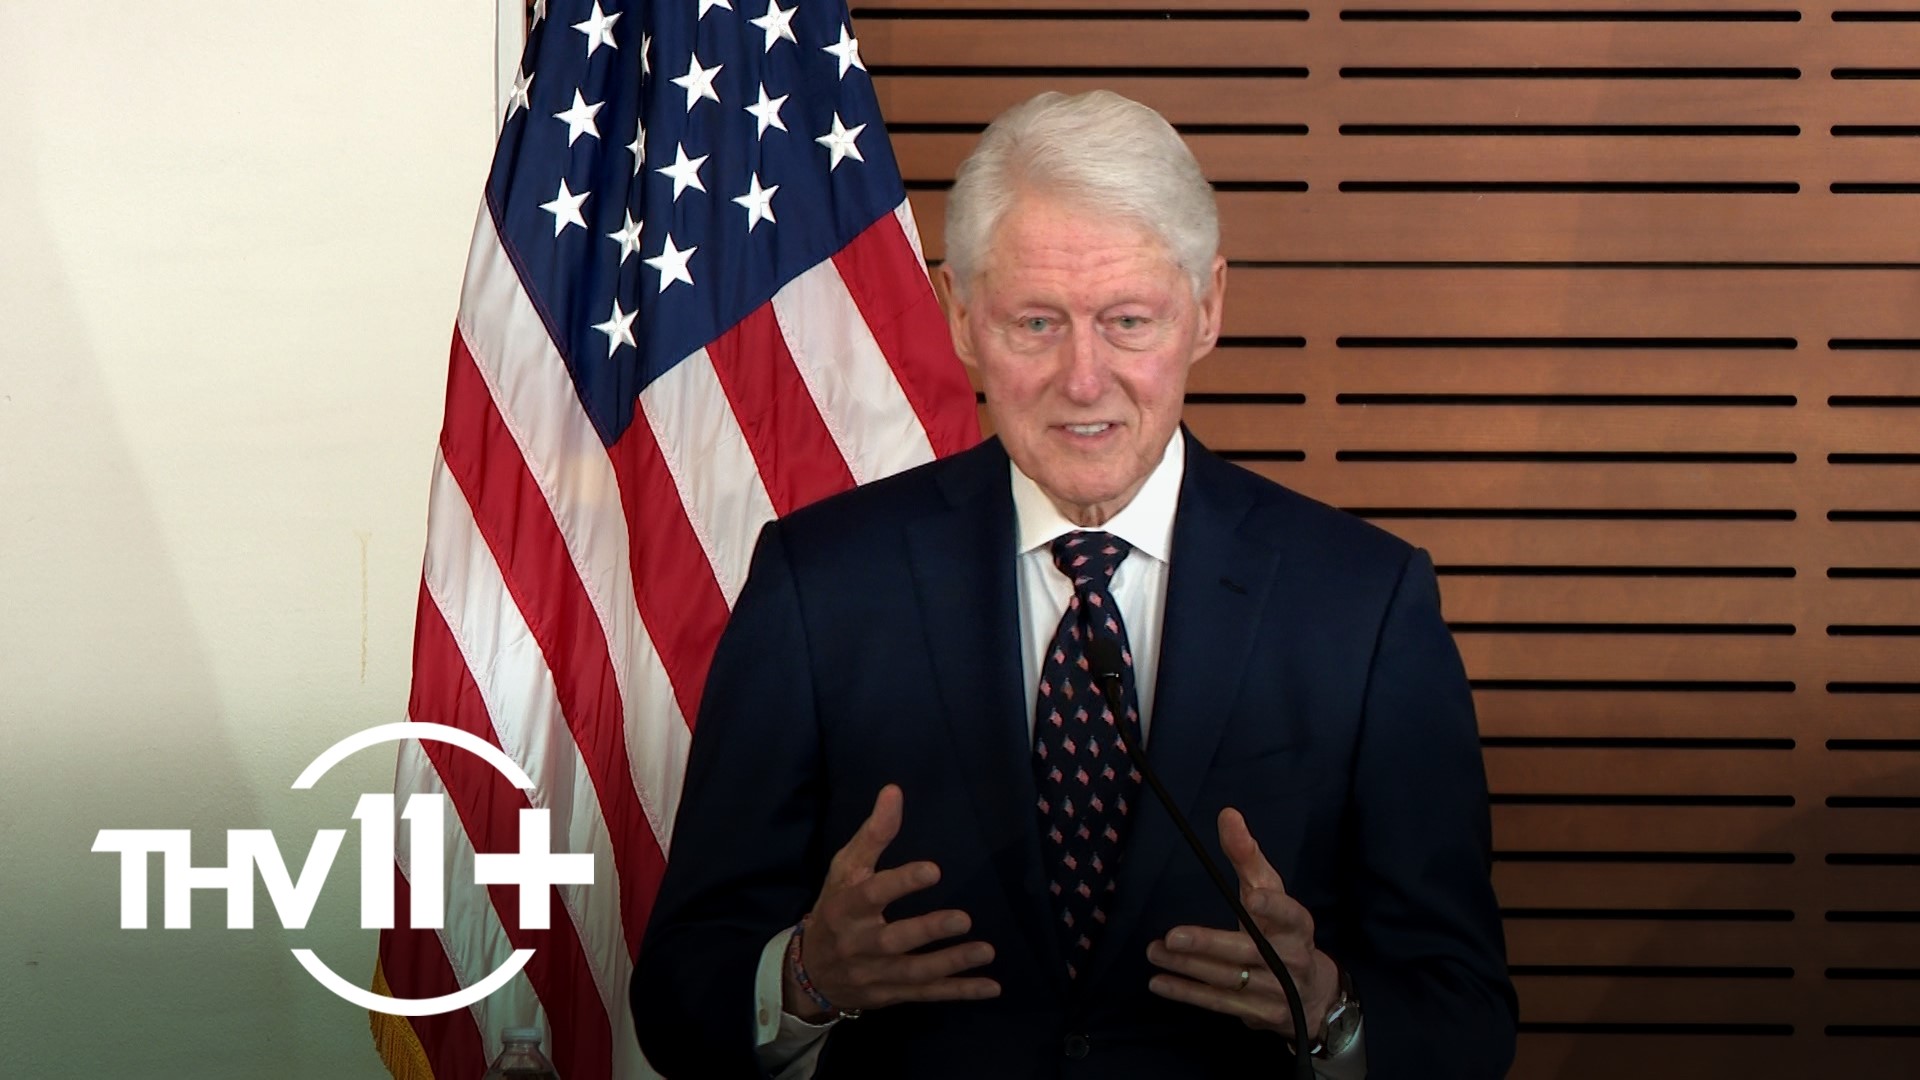 President Bill Clinton arrived at the Clinton Presidential Center in Little Rock this week to welcome 40 new U.S. citizens during a naturalization ceremony.